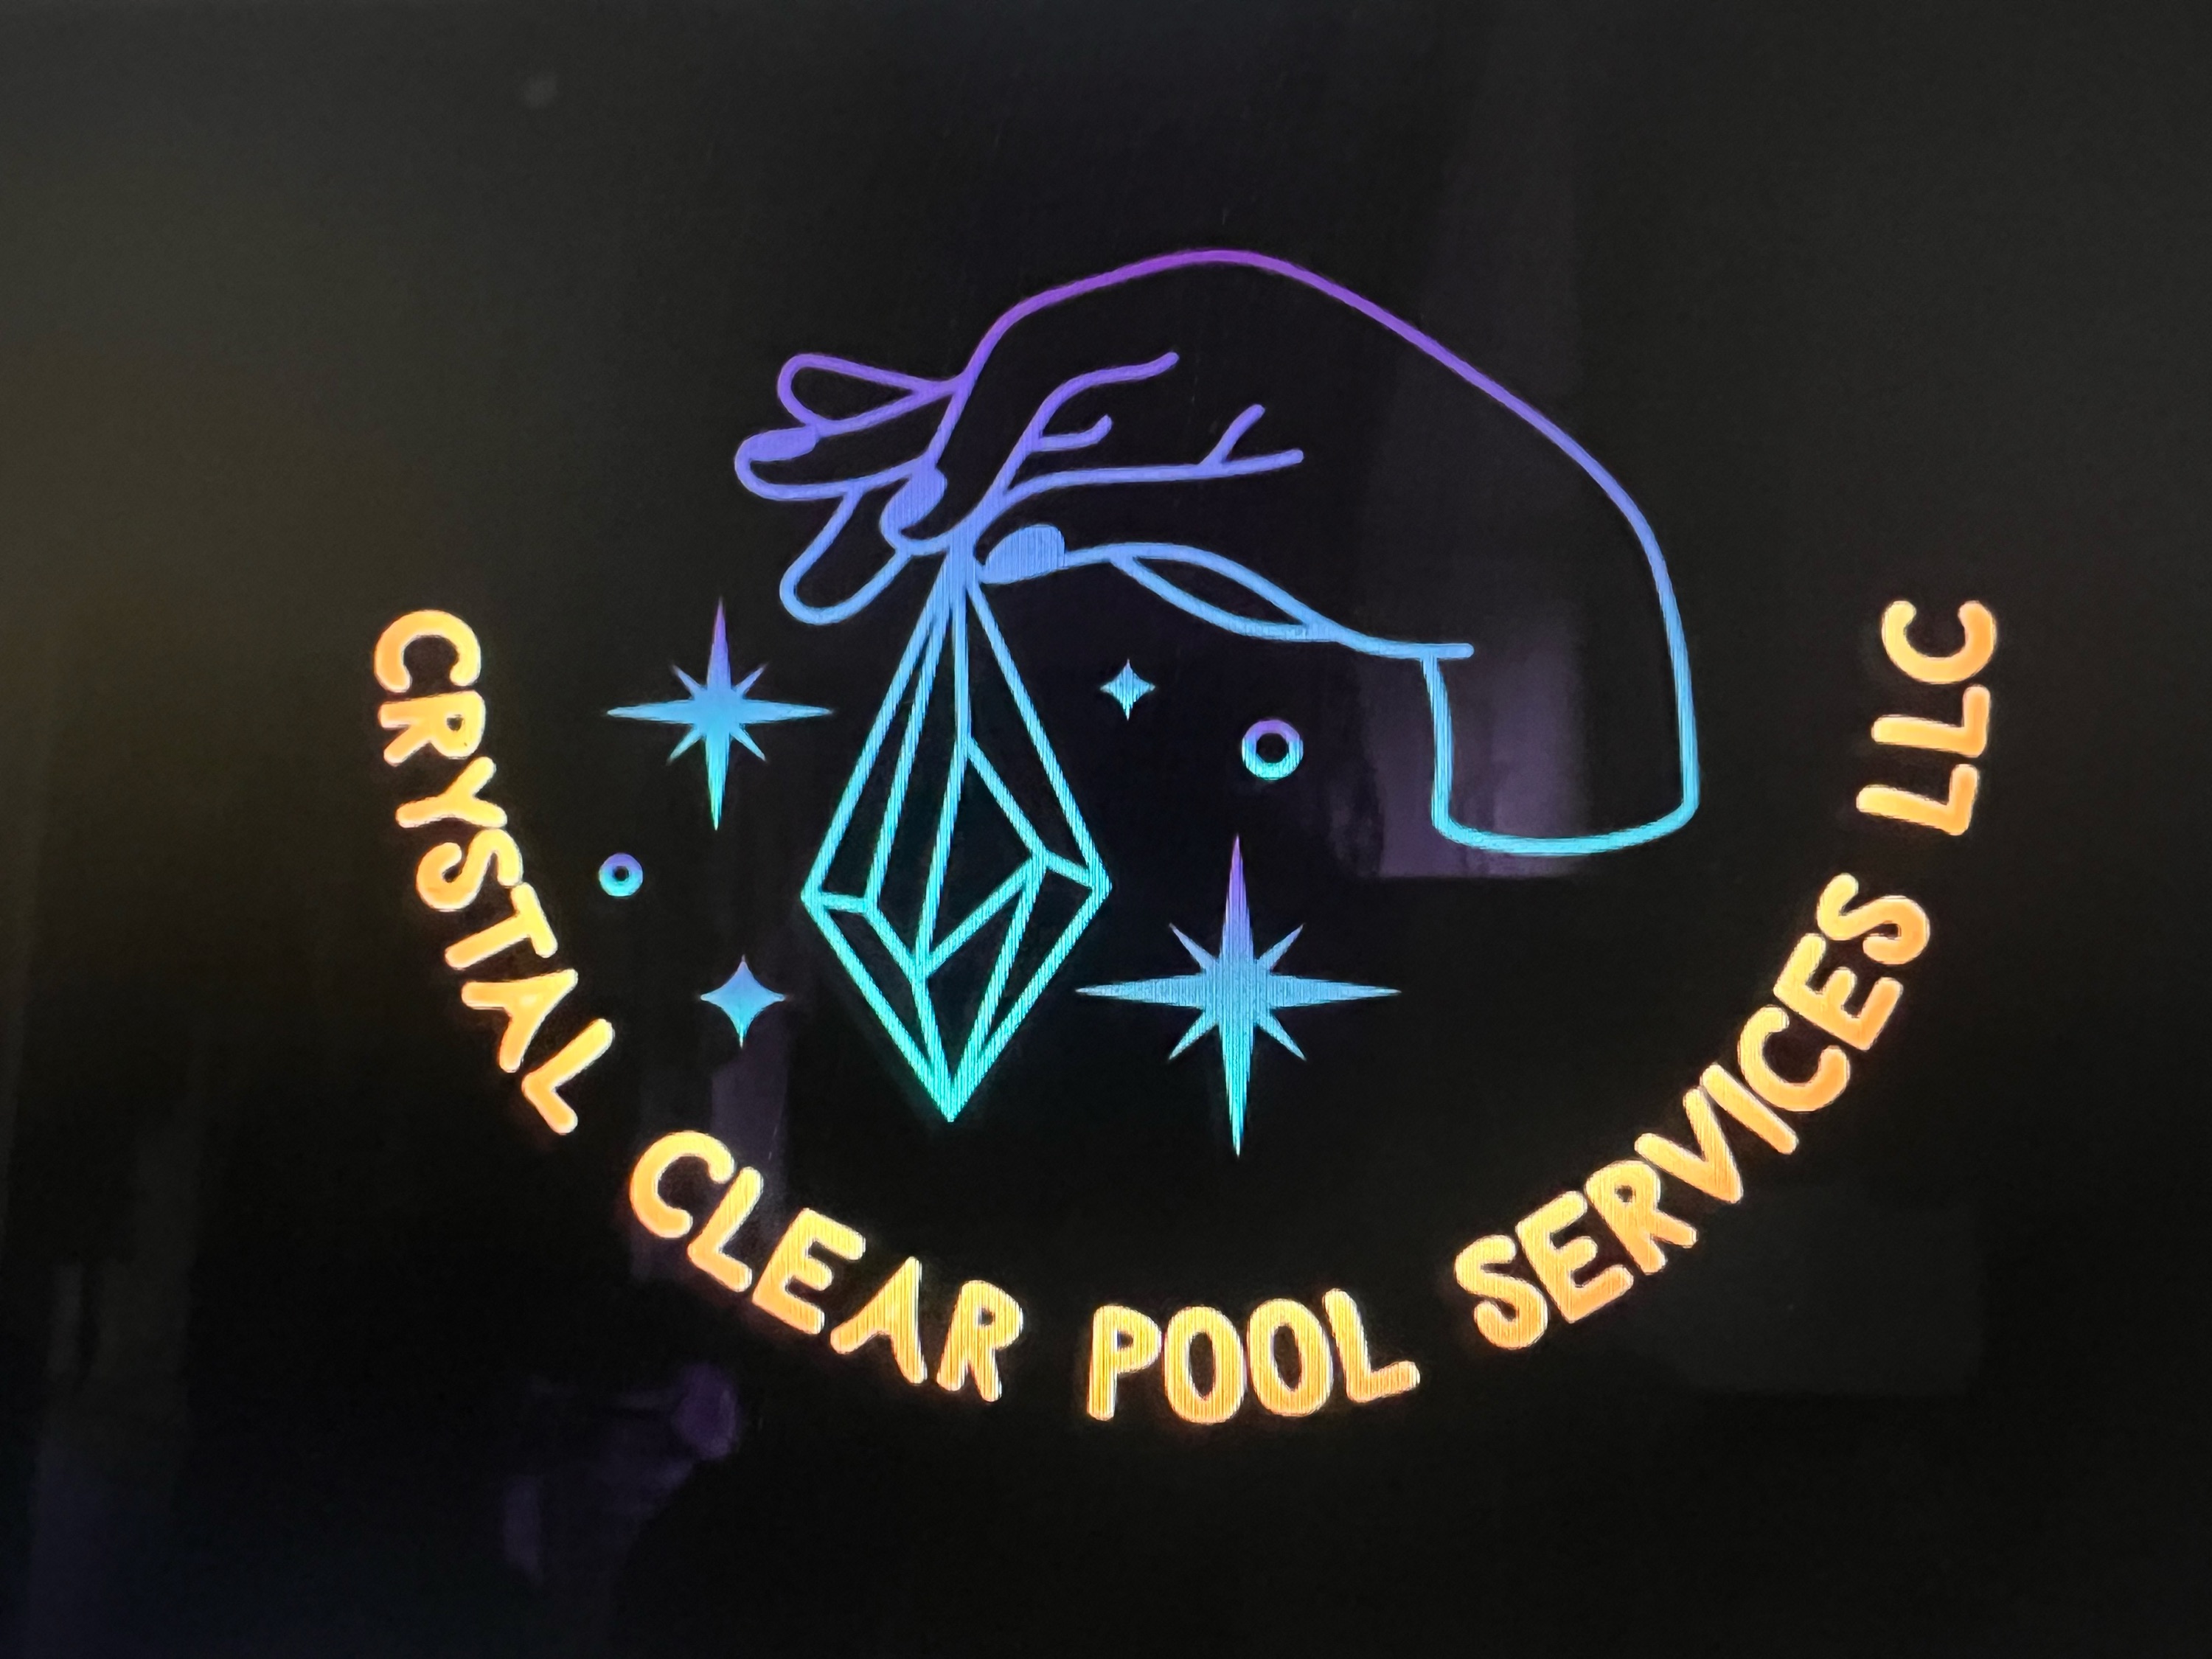 Crystal Clear Pool Services Logo